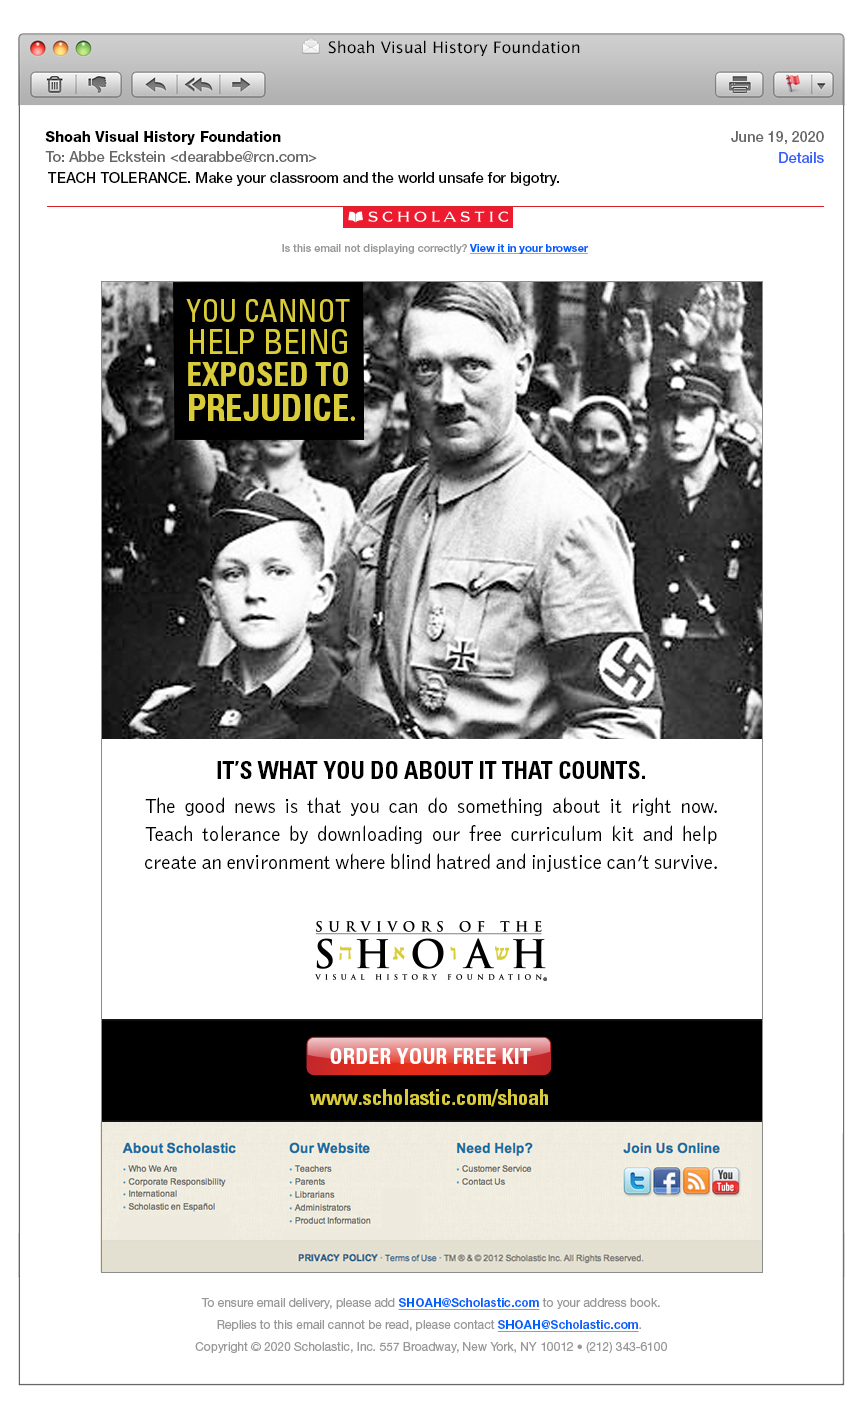 Shoah Foundation Email Concept